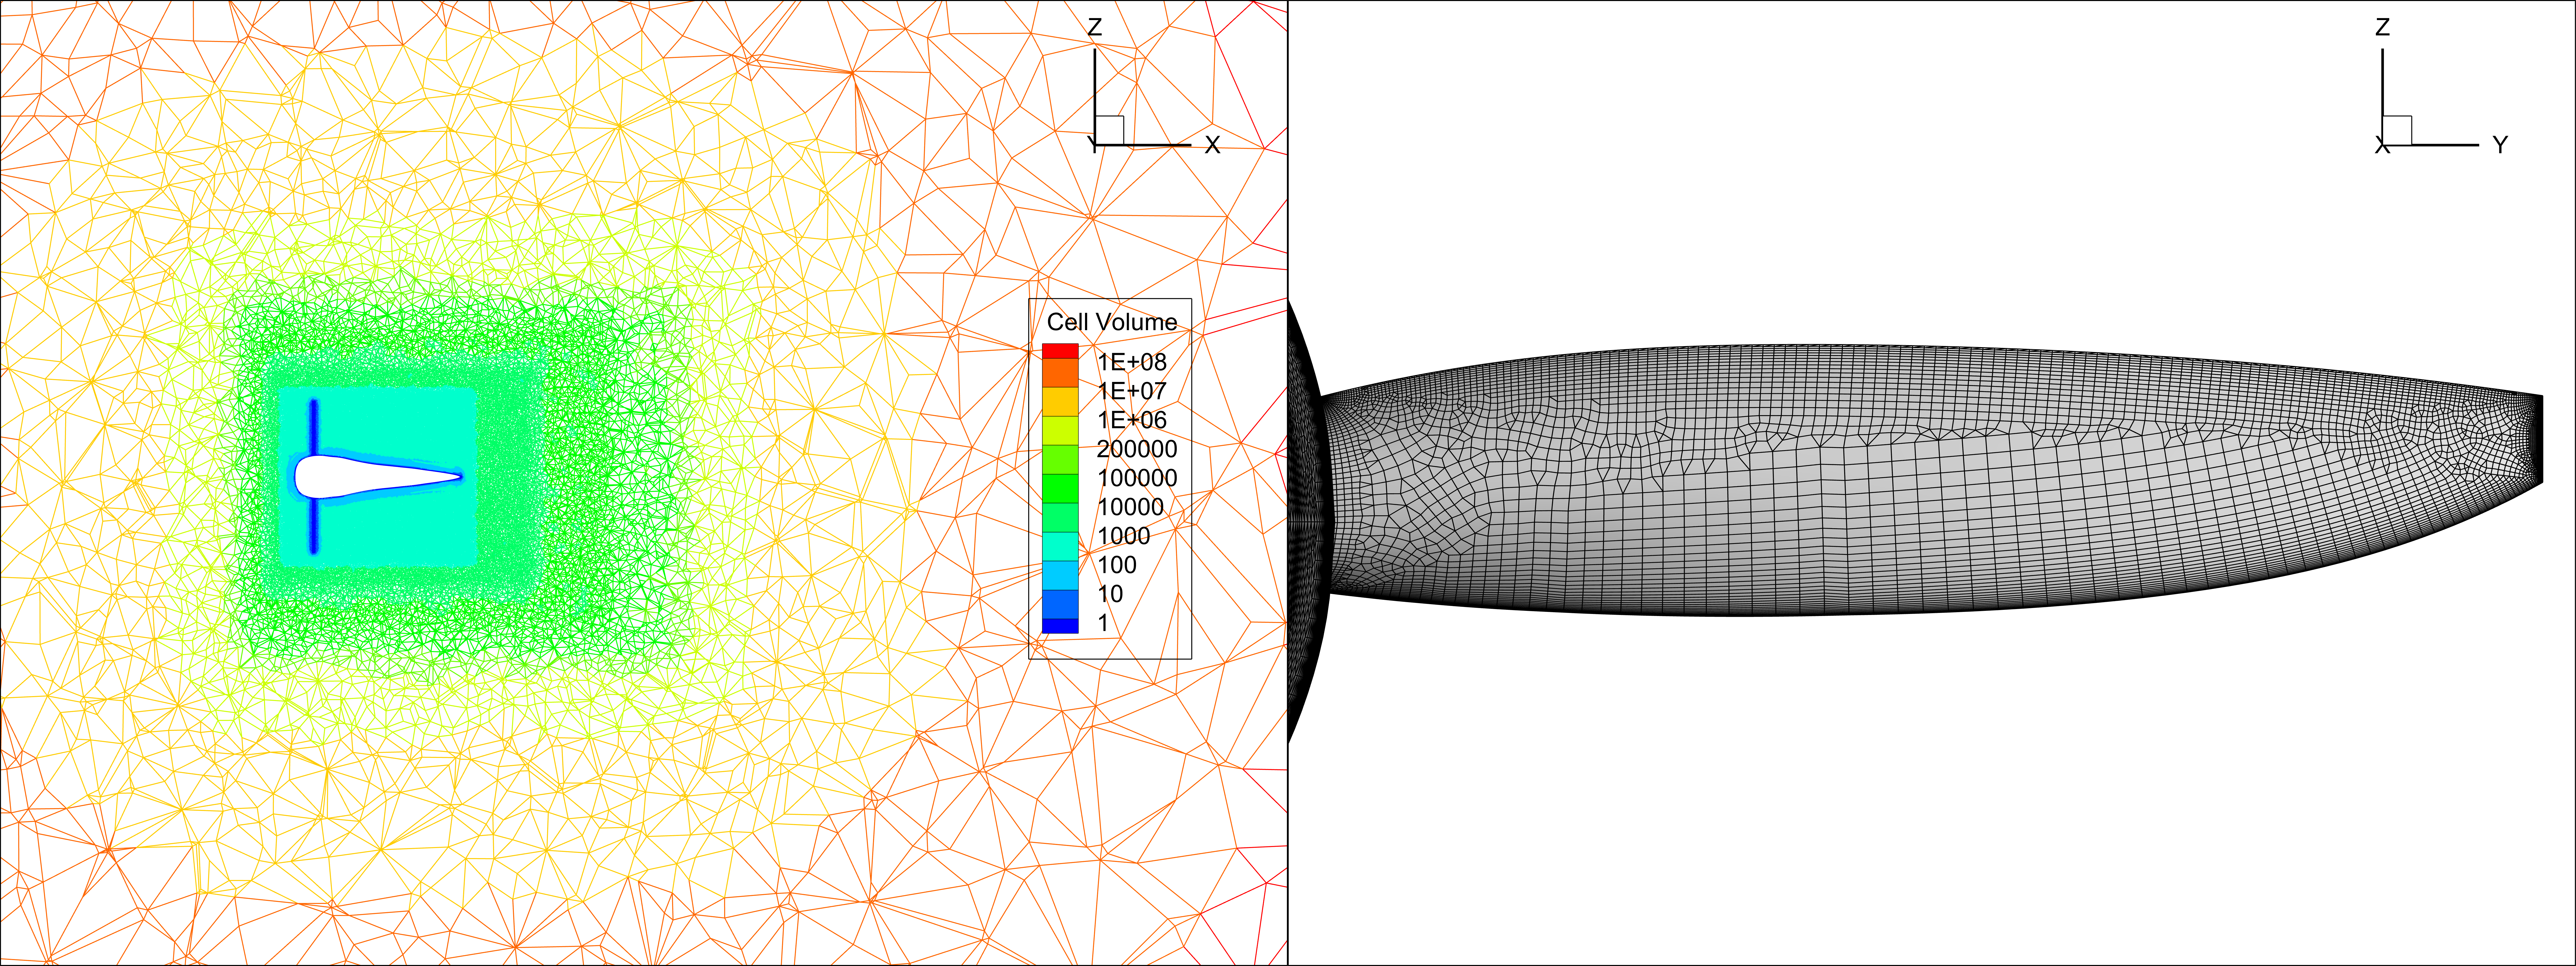 The figure shows simulation grids used for a rotor system and for a propeller blade